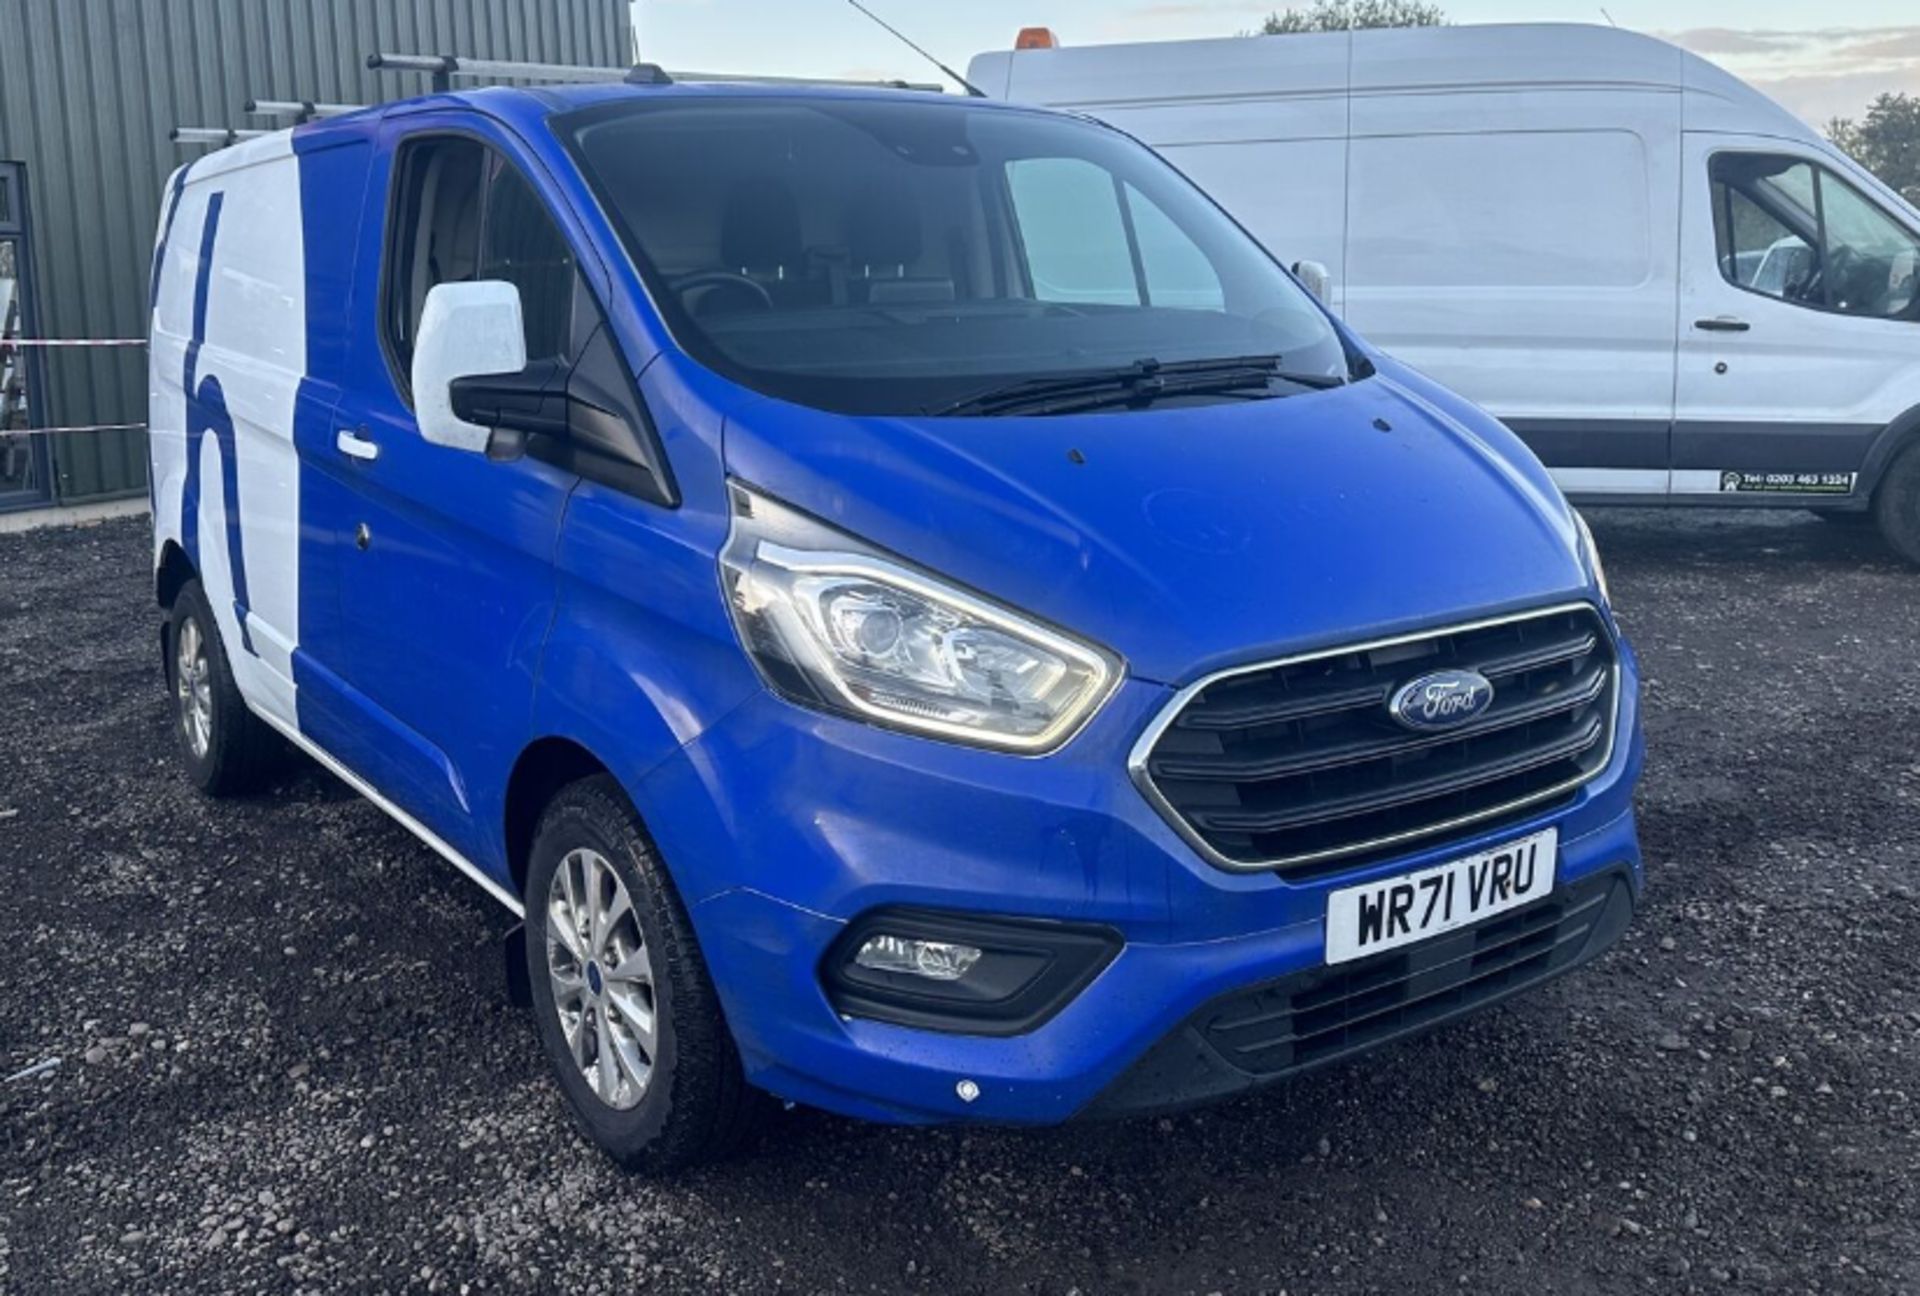 *(ONLY 64K MILEAGE & AUTOMATIC )* 71 PLATE FORD TRANSIT CUSTOM 300 LIMITED EBLUE - BARGAIN!!!!!